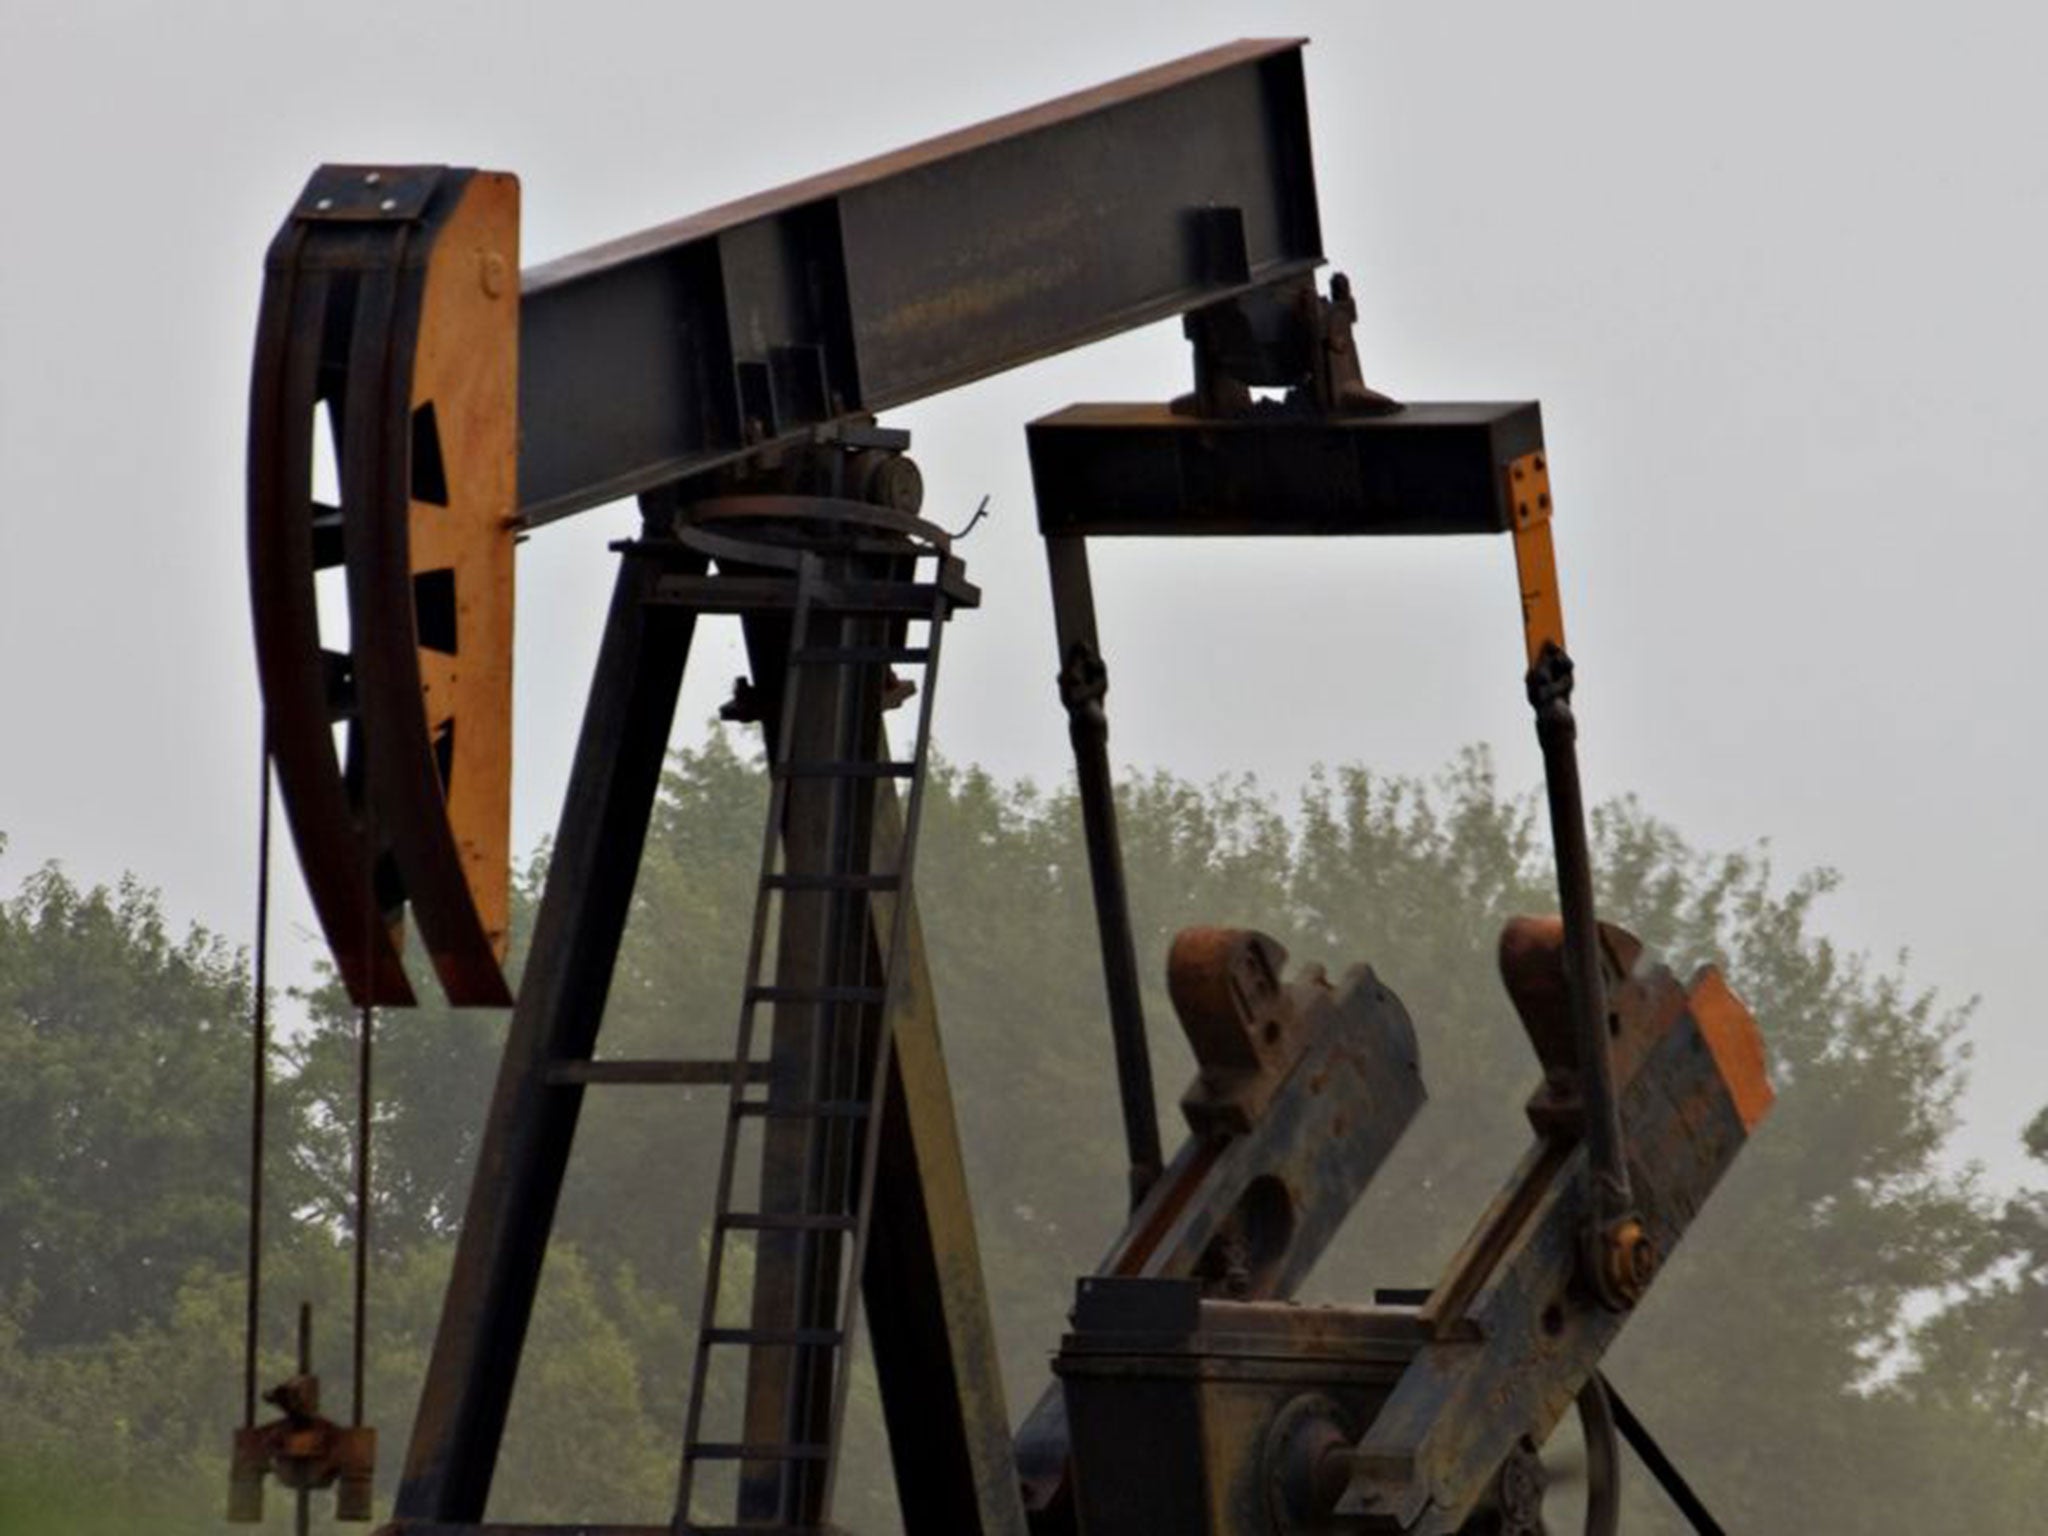 Sefton’s oil wells in Kansas produced only nine barrels of oil a day